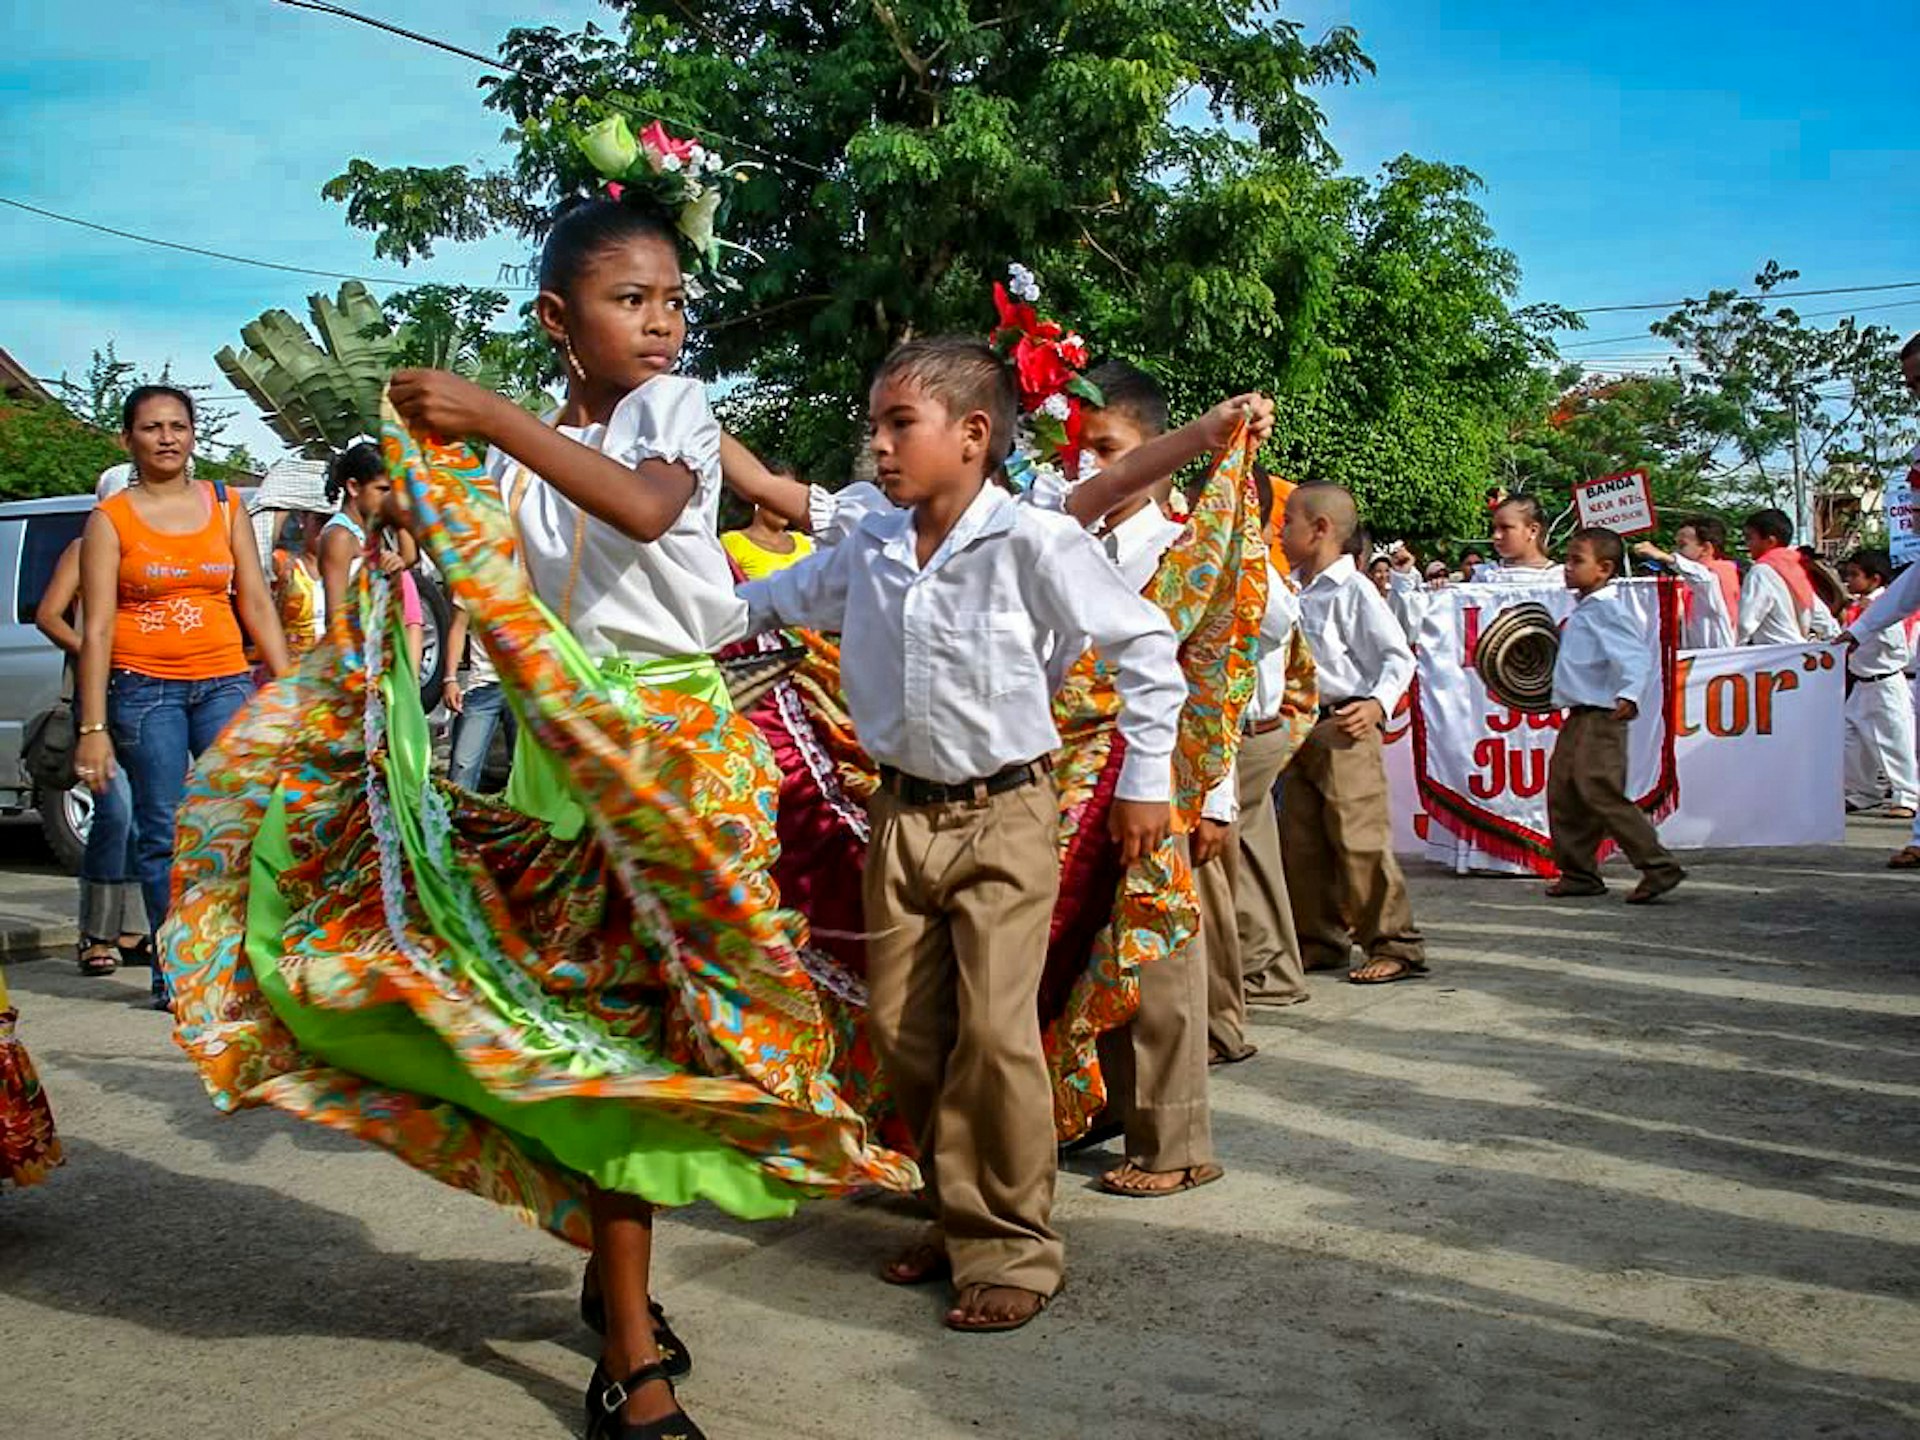 Young girls dressed in colorful skirts and young boys in a white shirt and khakis dance to porro